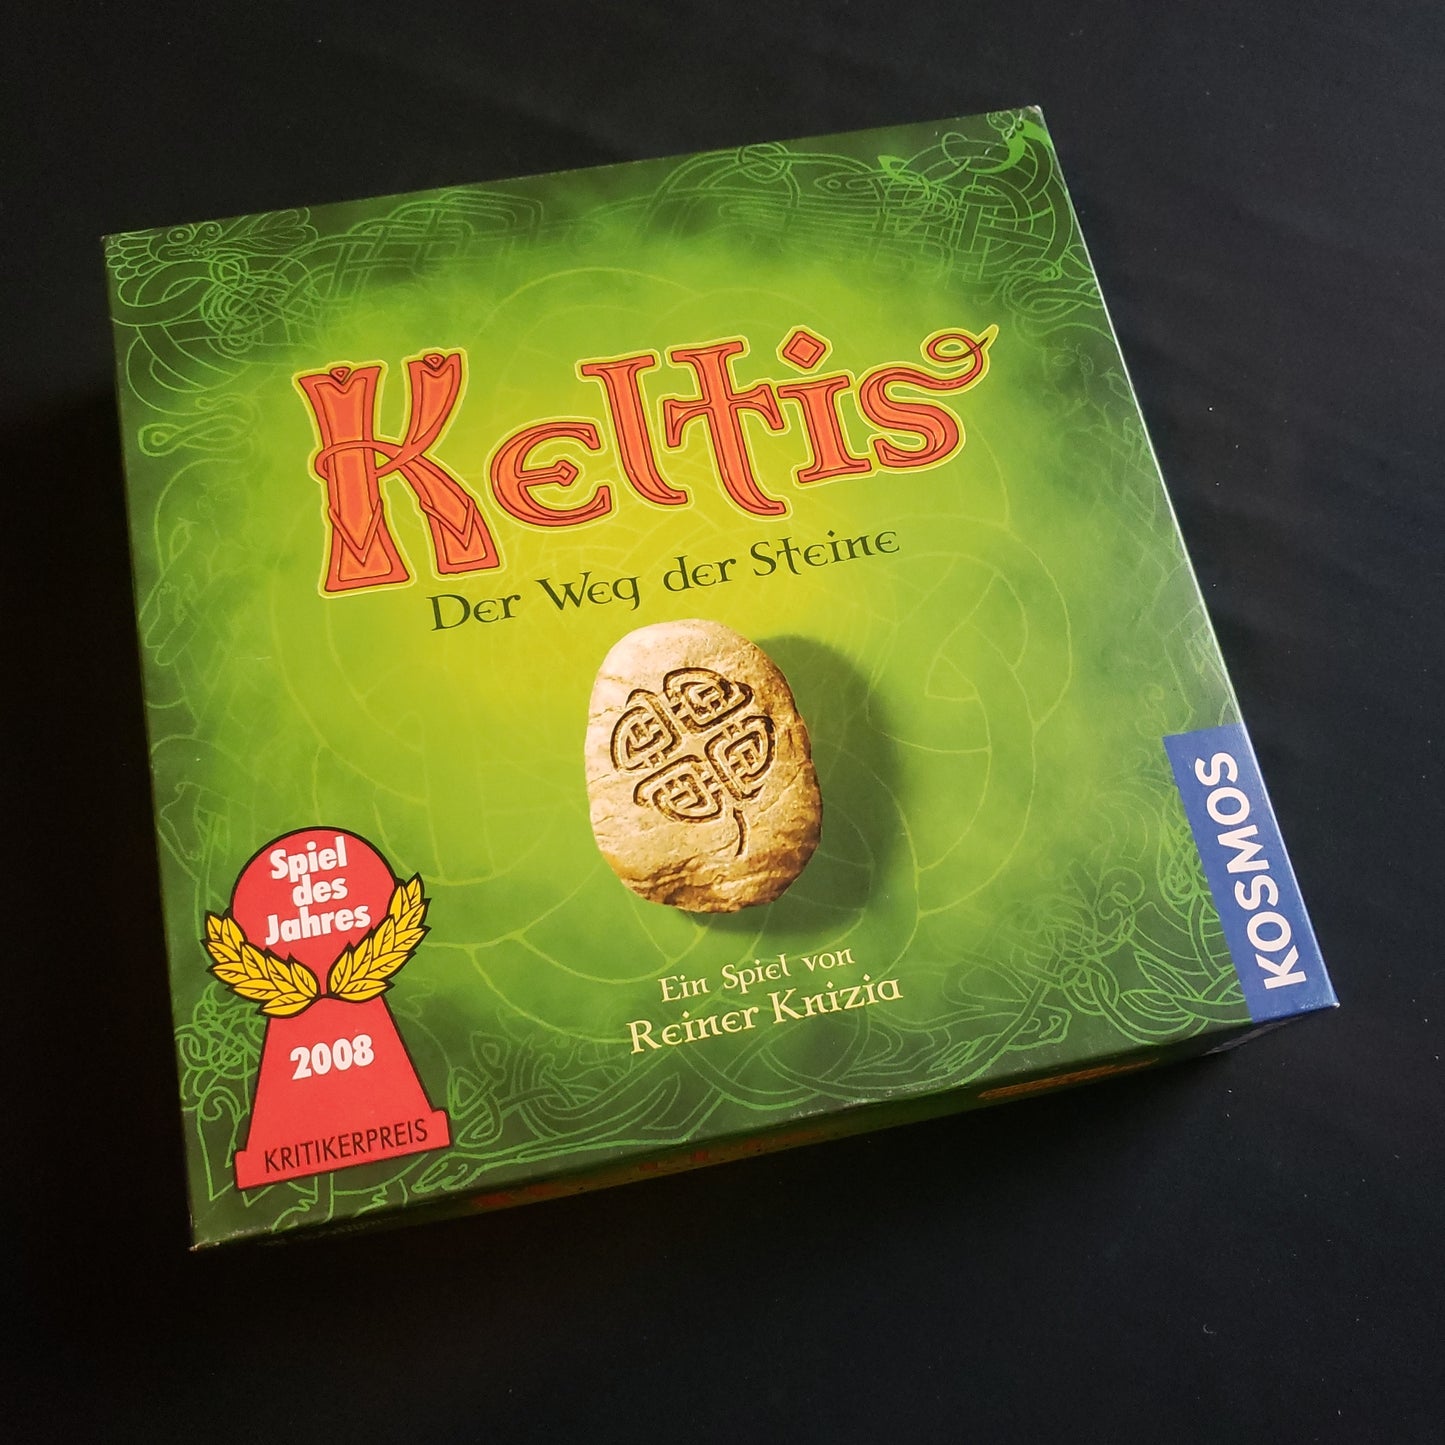 Image shows the front cover of the box of the Keltis board game